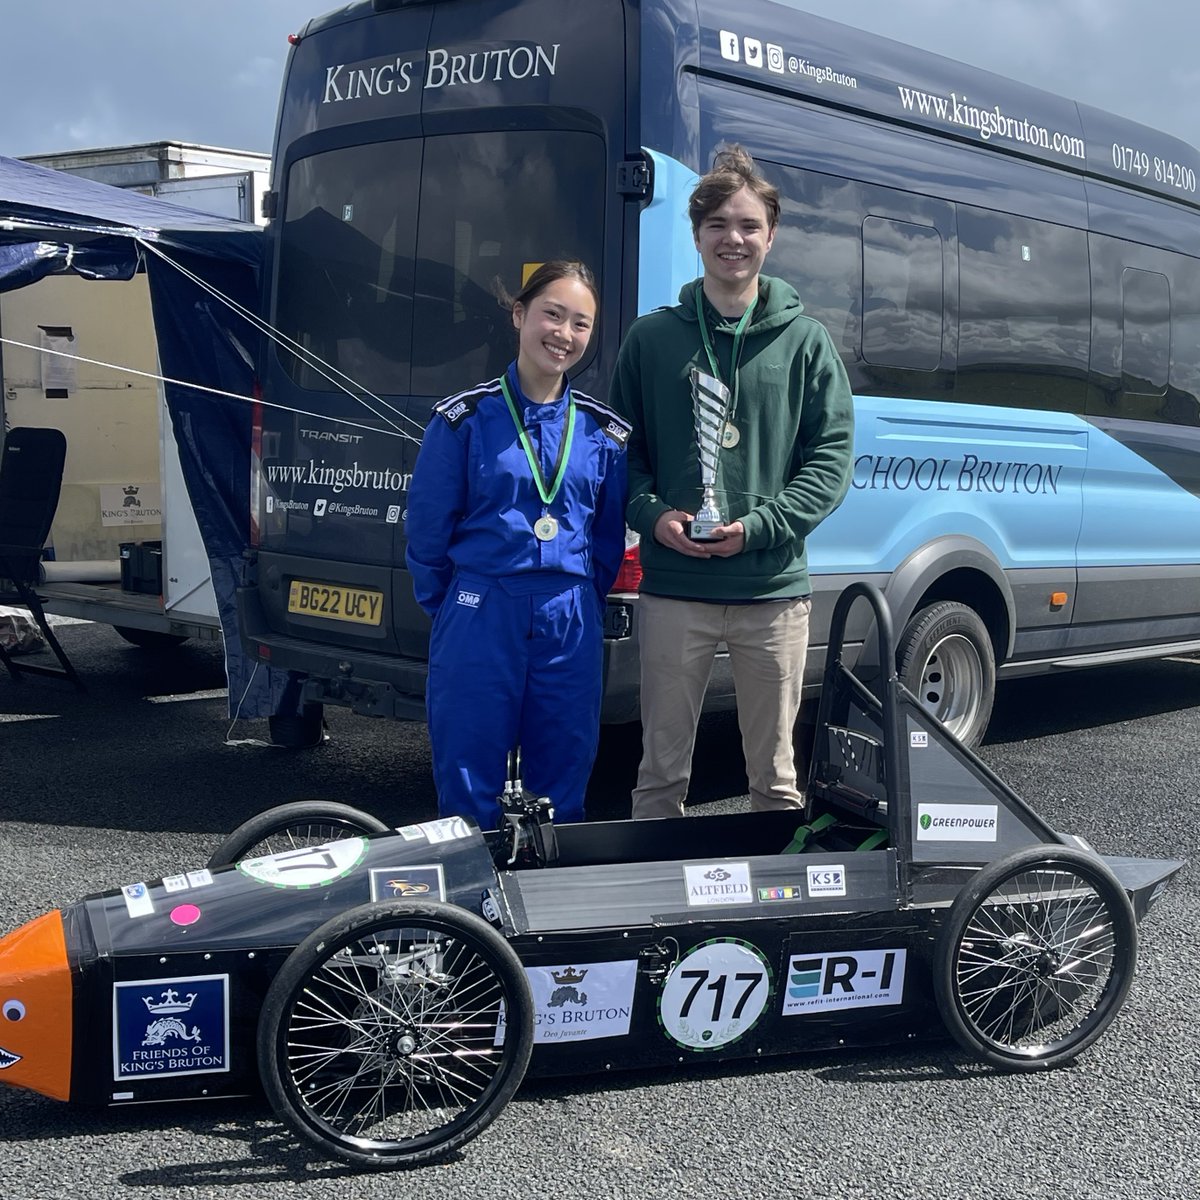 Congratulations to our #KSBMotorSport team who came 1st in their class at RMB Chivenor earlier today. Well done to Barney and our new Driver, Hannah. Thank you to our sponsors.
@KingsBruton #KSBQuality #KSBSuccess @KSBDT @KSBSixthForm @Greenpowertrust @Refit_I @EventsKSB